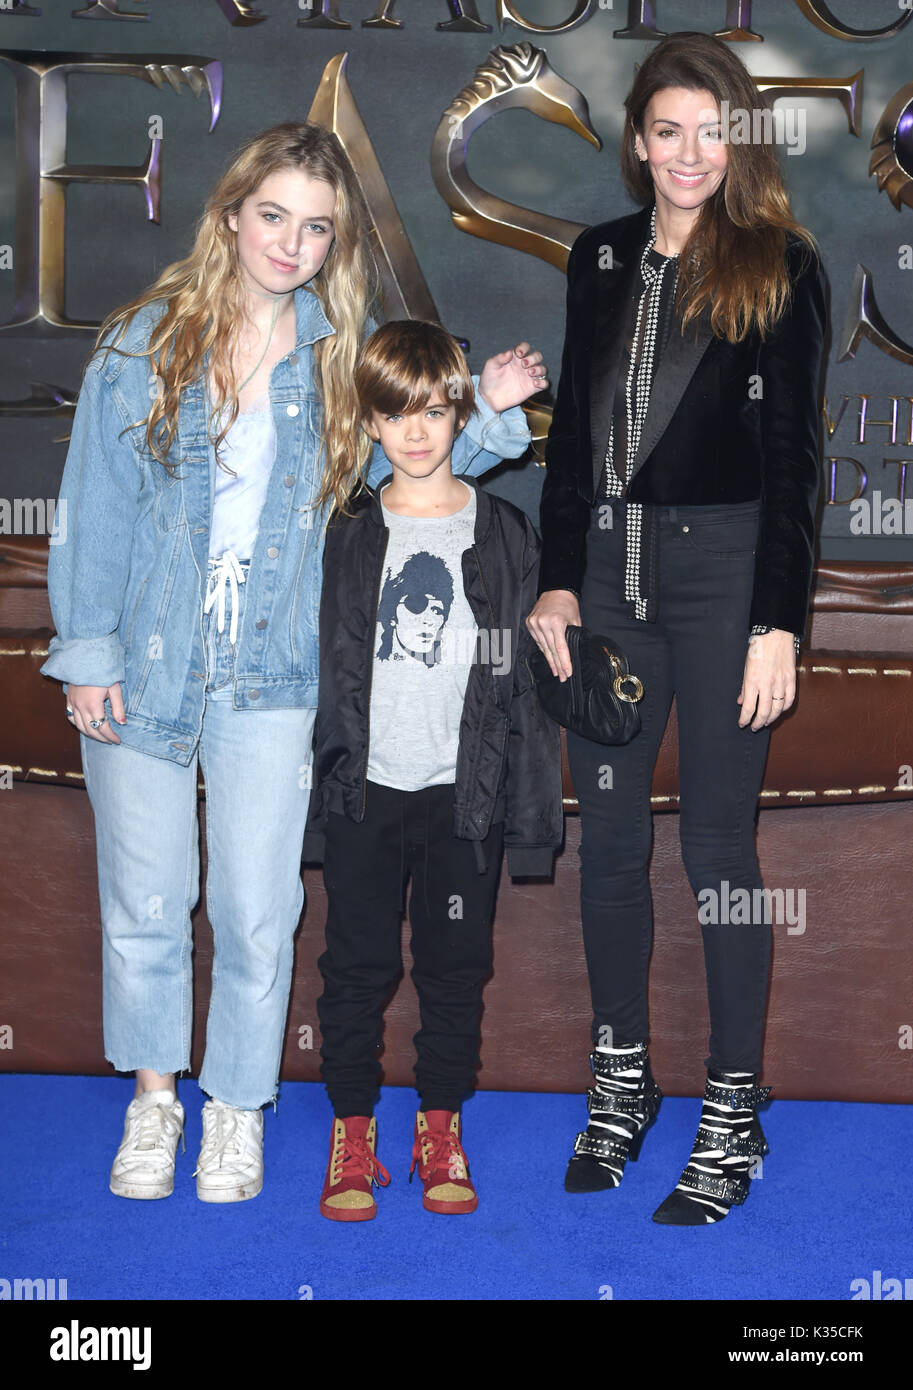 Photo Must Be Credited ©Alpha Press 079965  15/11/2016  Sara MacDonald and Son Donovan and Anais Gallagher European Premiere Of Fantastic Beasts And Where To Find Them Leicester Square London Stock Photo